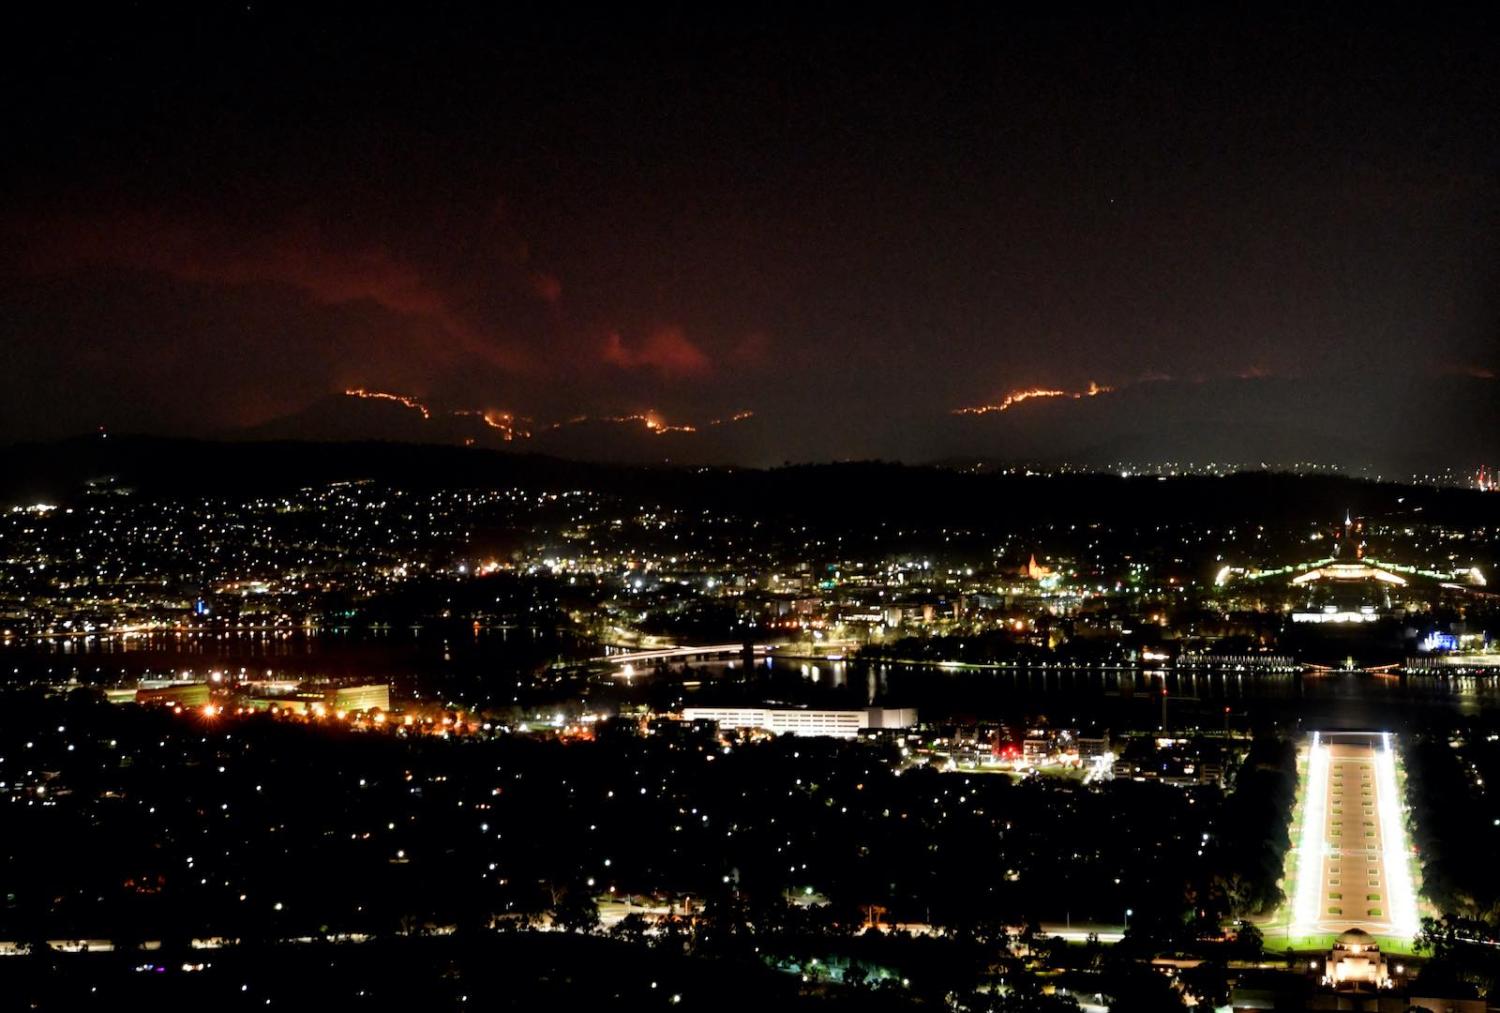 The Orroral Valley fire burns near Canberra, 31 January 2020 (Tracey Nearmy/Getty Images)